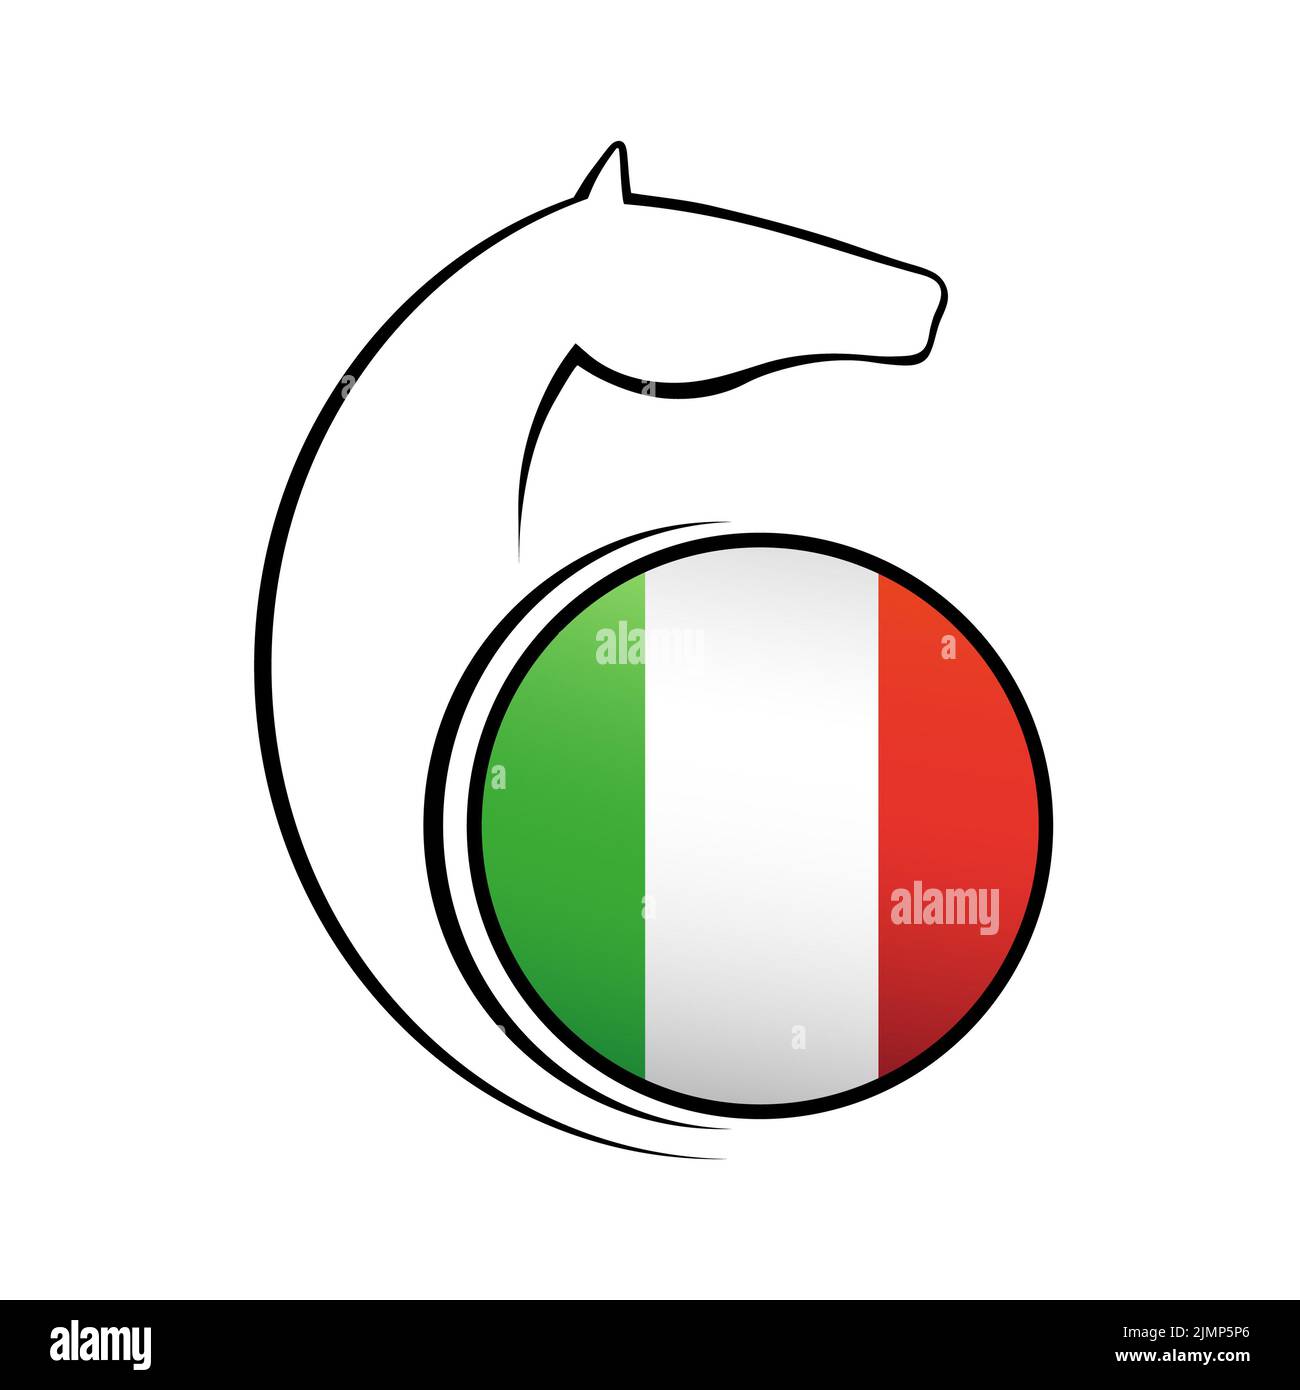 Horse symbol with Italy flag vector element Stock Photo